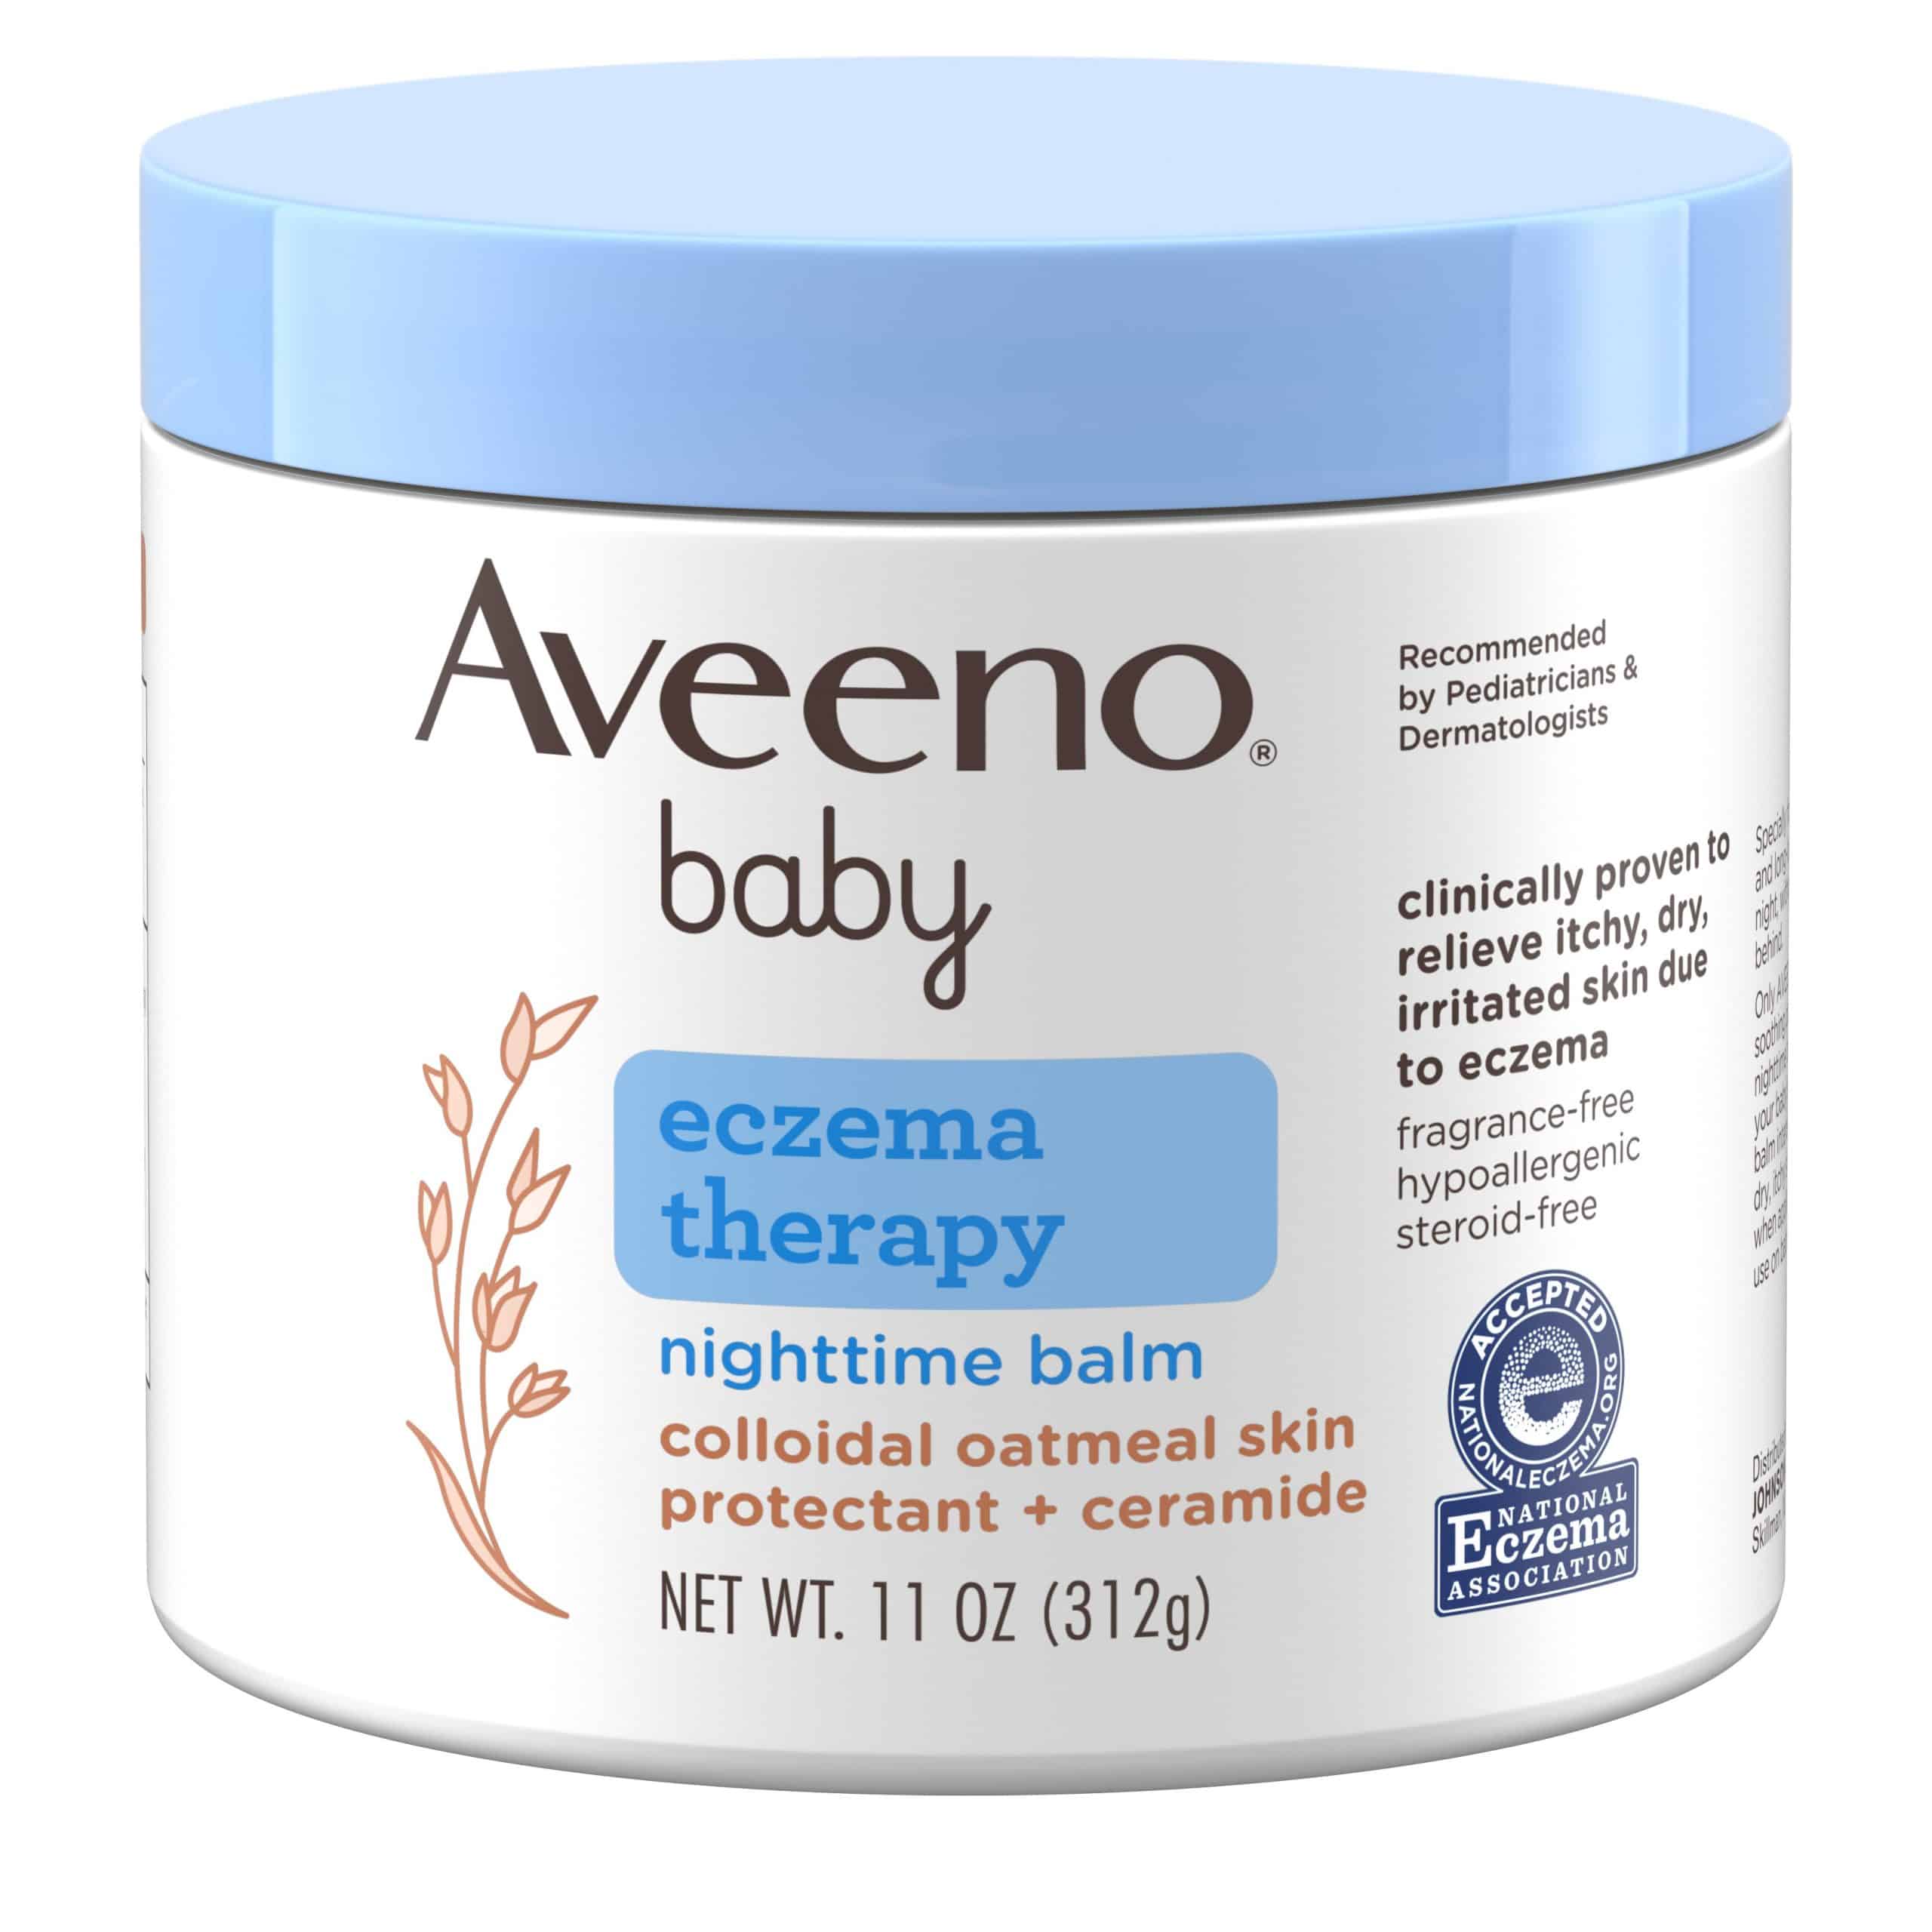 Aveeno Baby Eczema Therapy Nighttime Balm with Natural Oatmeal, 11 oz ...